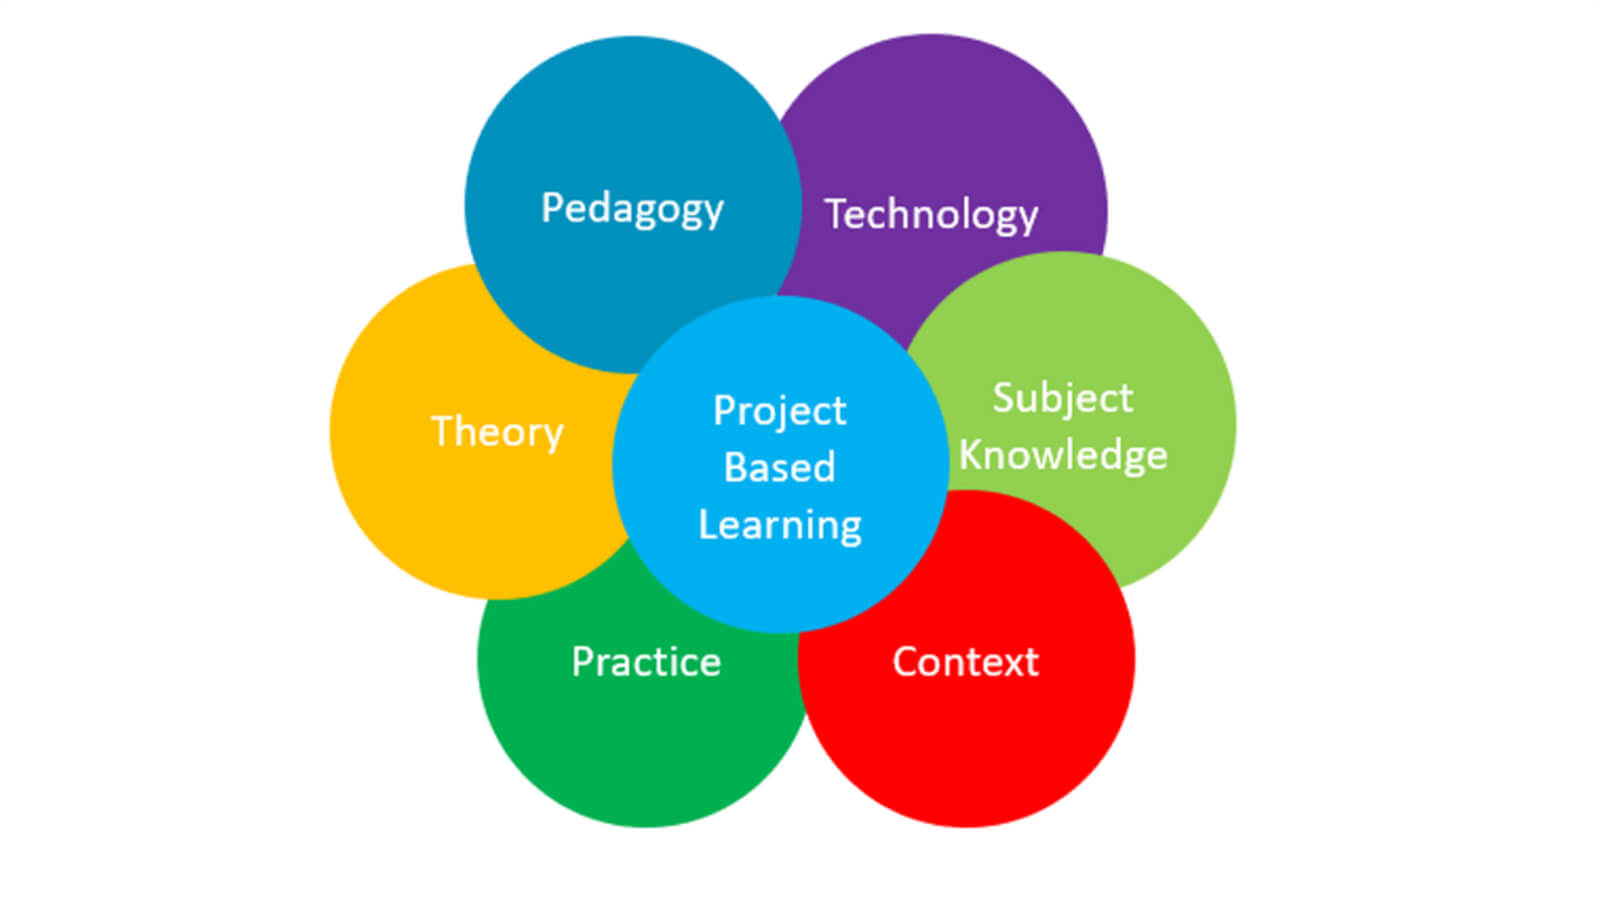 research on project based learning